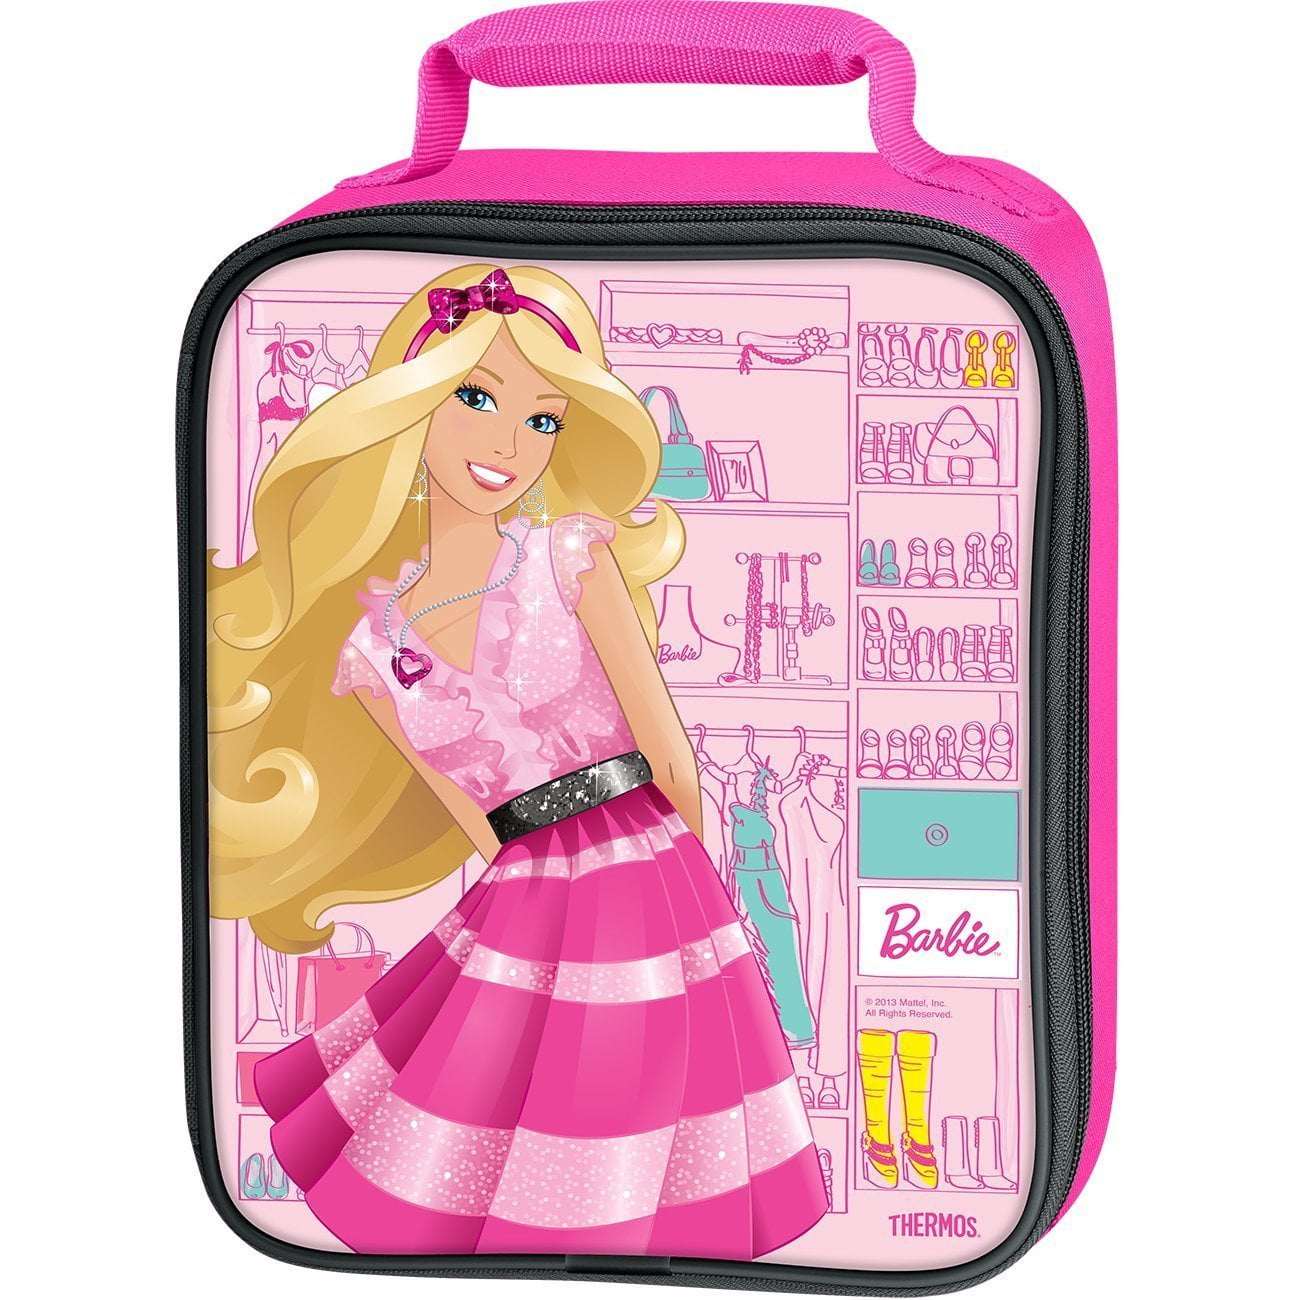 Barbie ~ Insulated Lunchbox Lunch Bag ~ Pink and Teal ~ Cute!